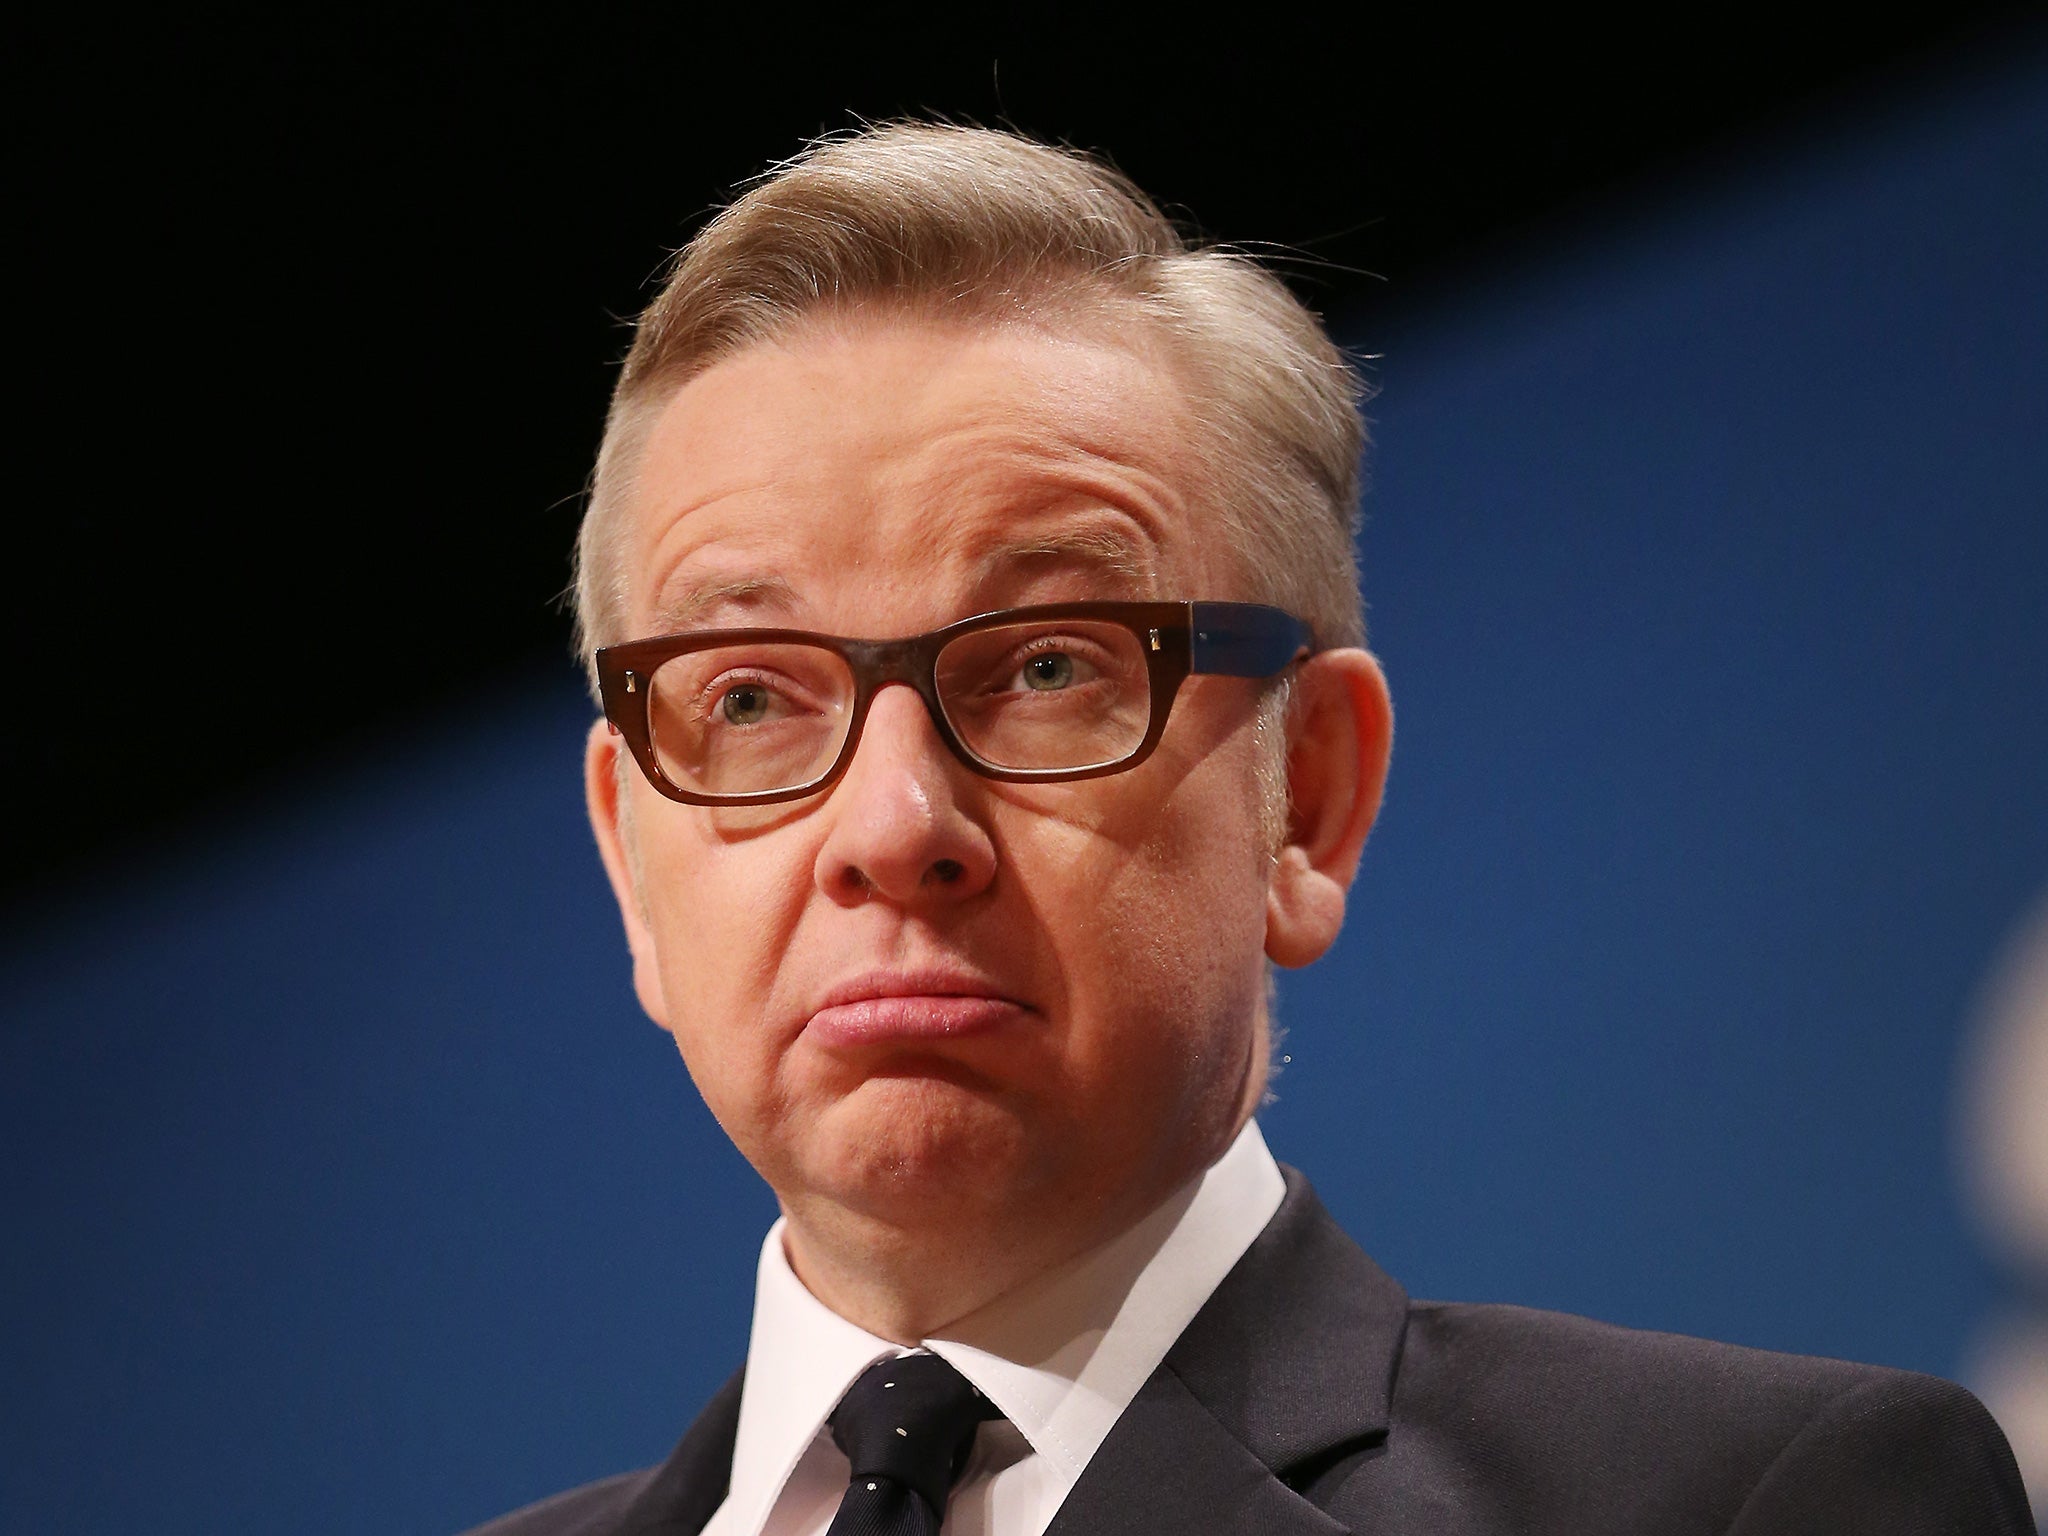 Michael Gove will find himself under pressure to distinguish himself from predecessor Chris Grayling